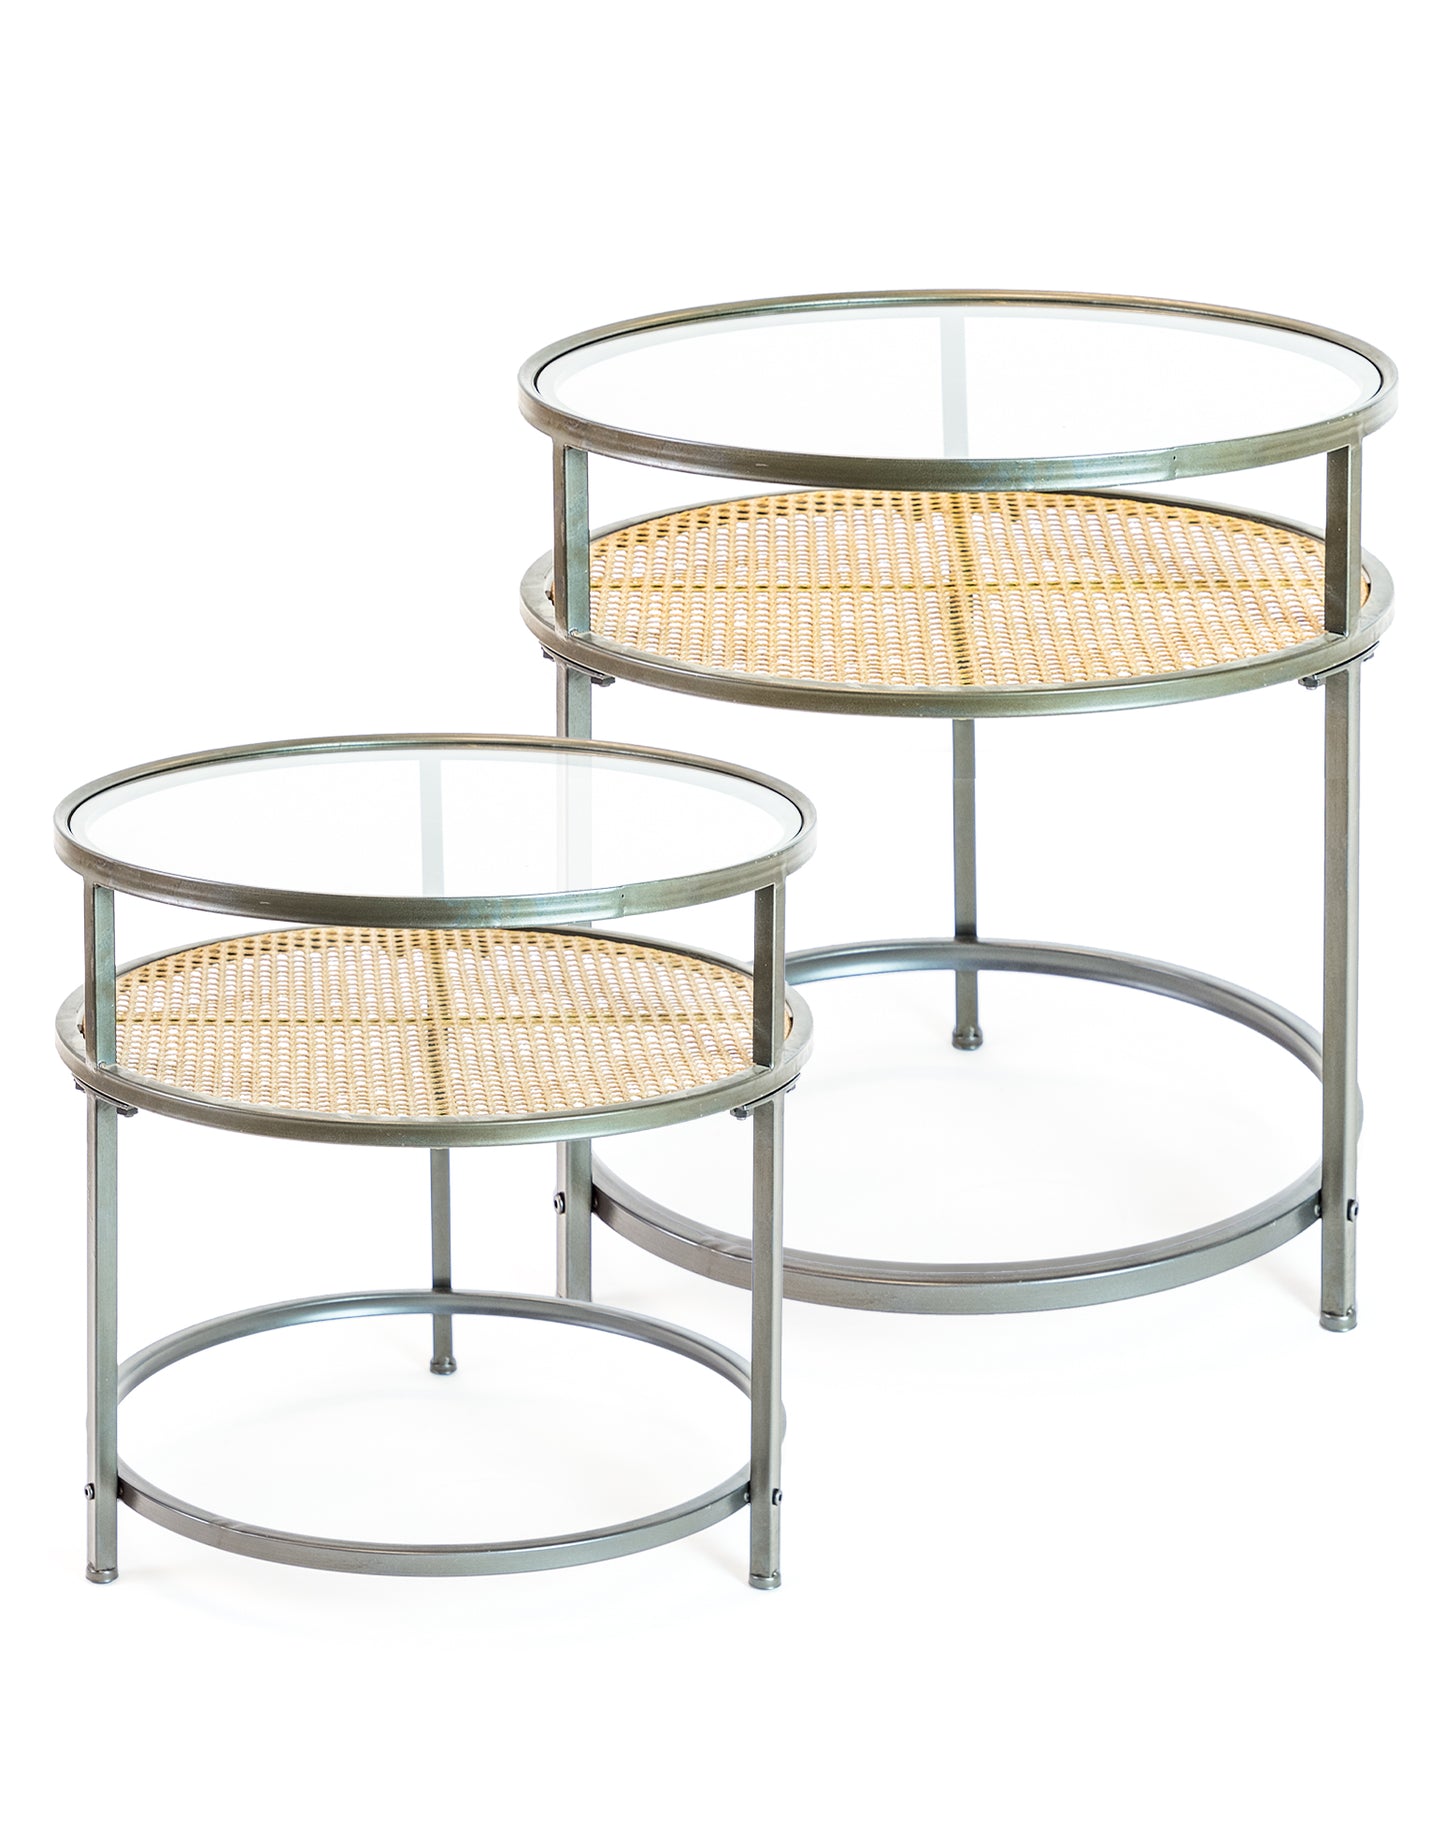 Iron, Glass and Rustic Metal Rattan Set of 2 Round Side Tables